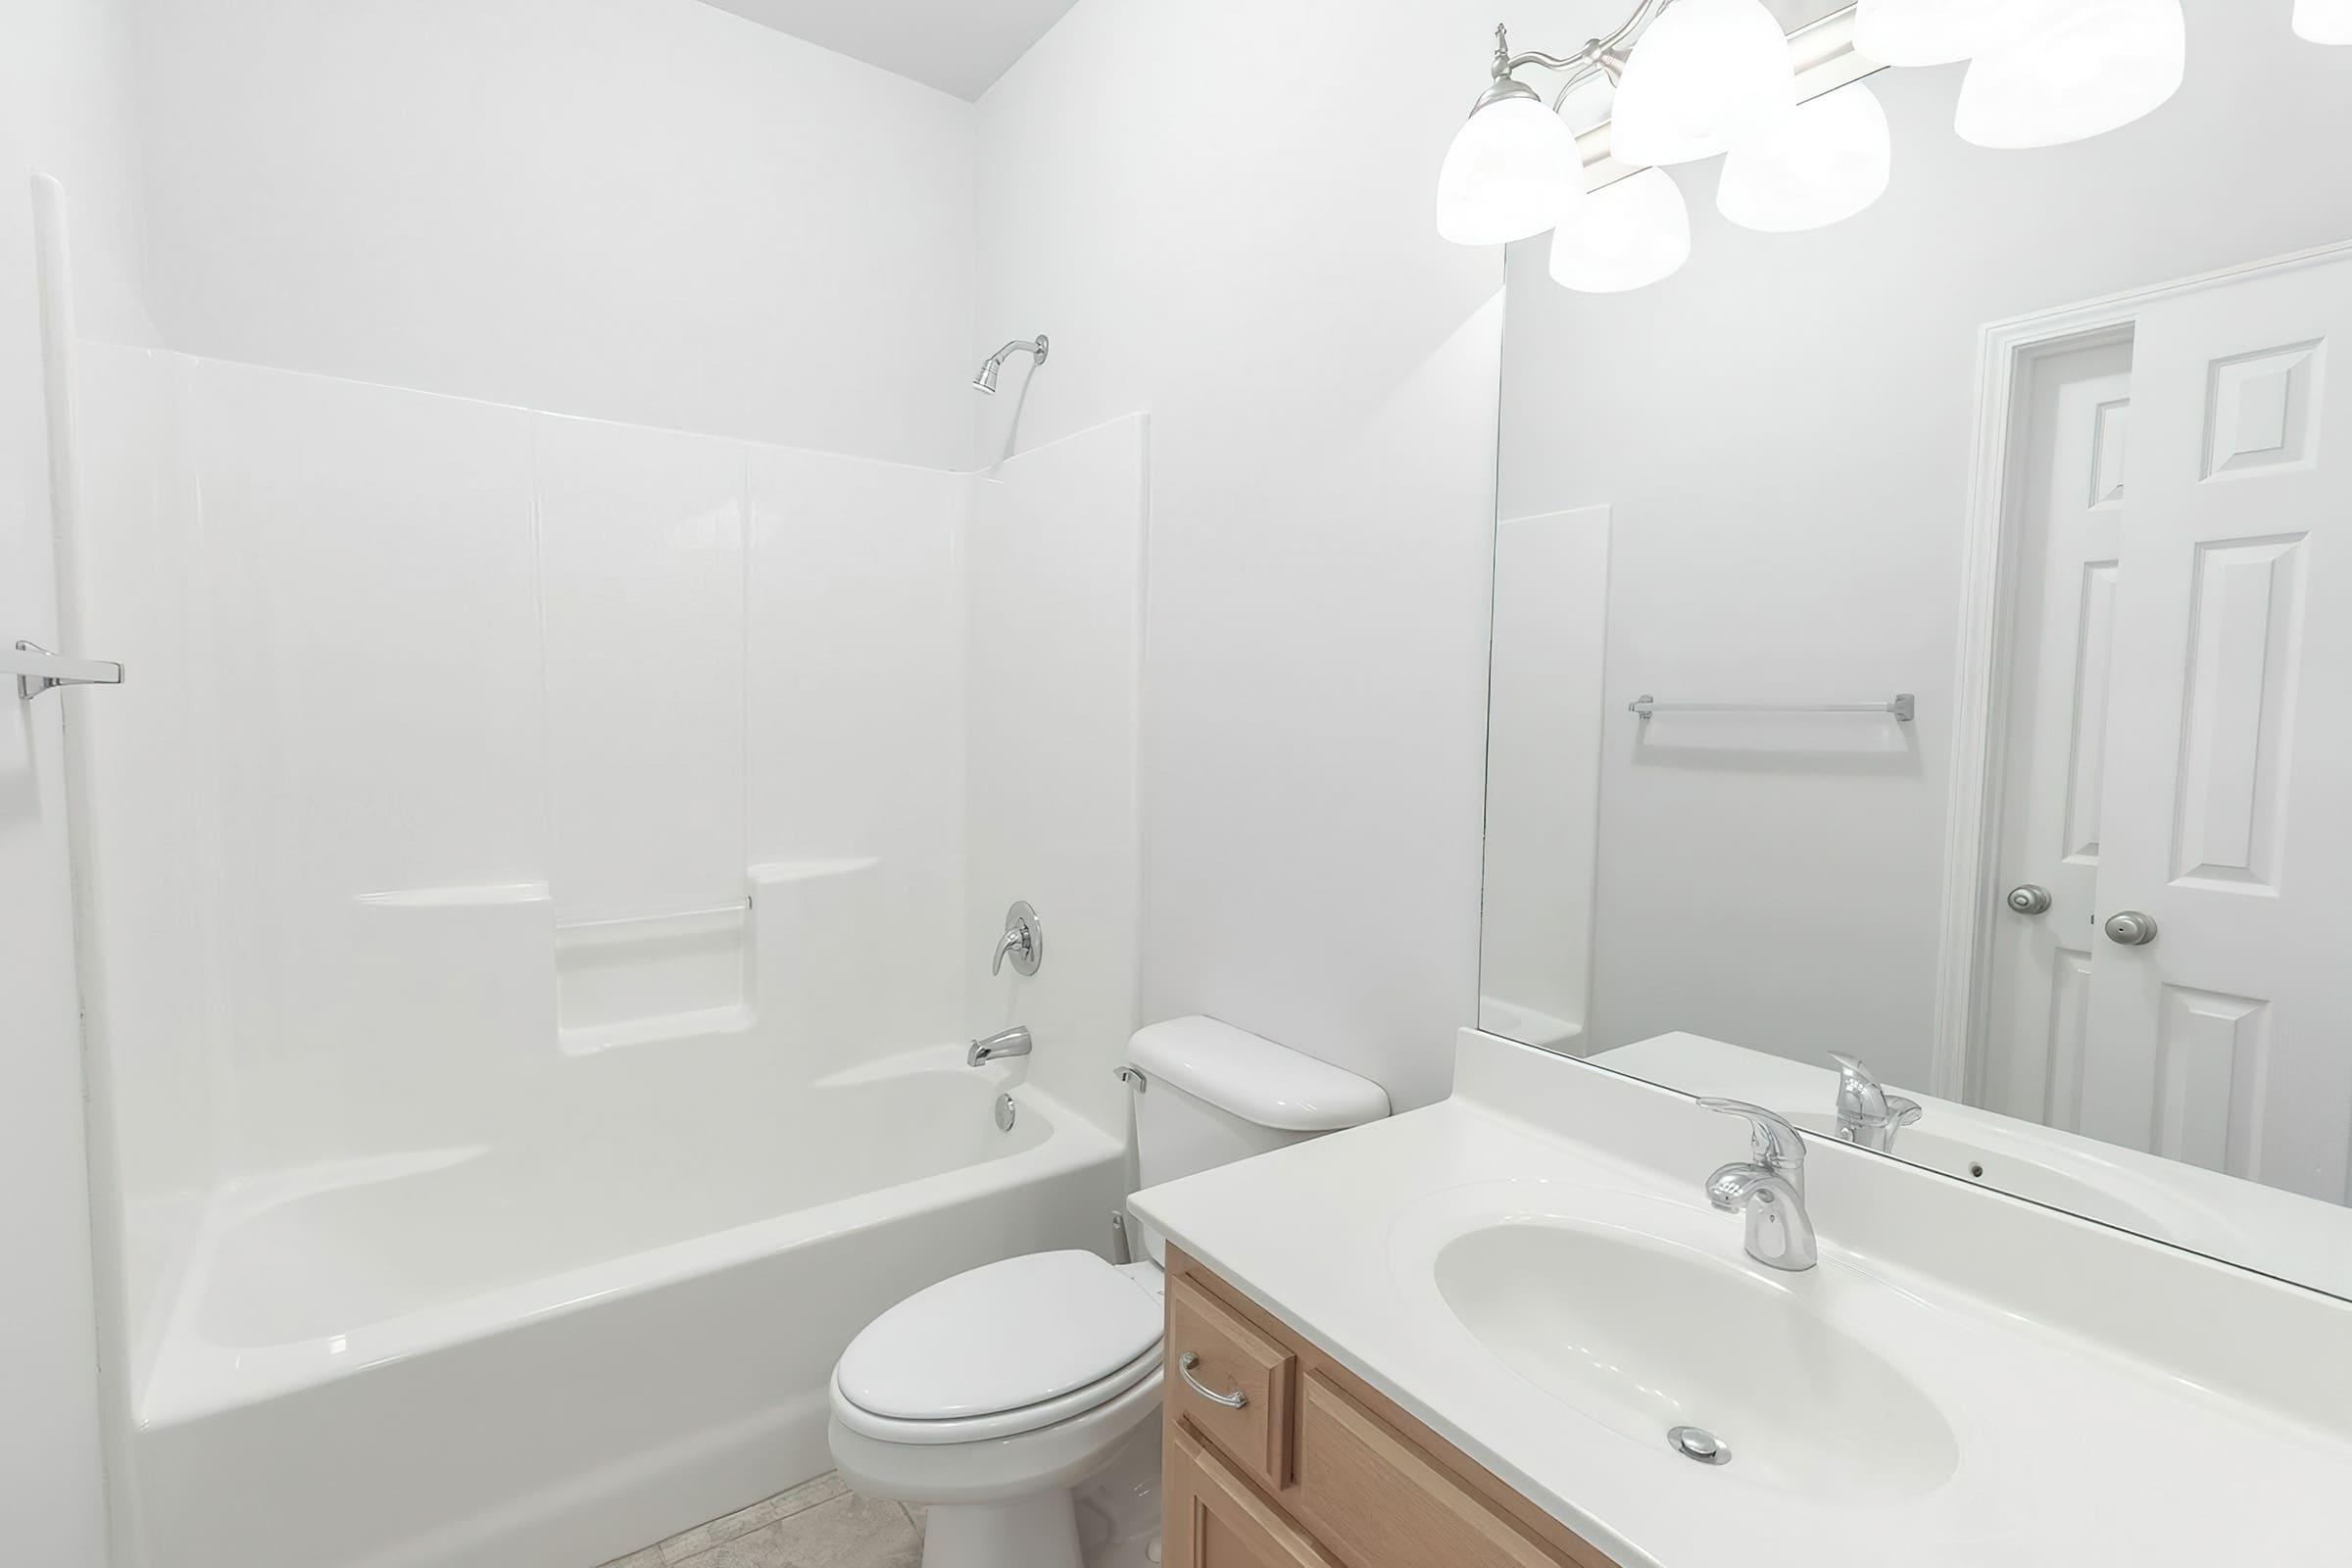 Select homes feature 3 full bathrooms